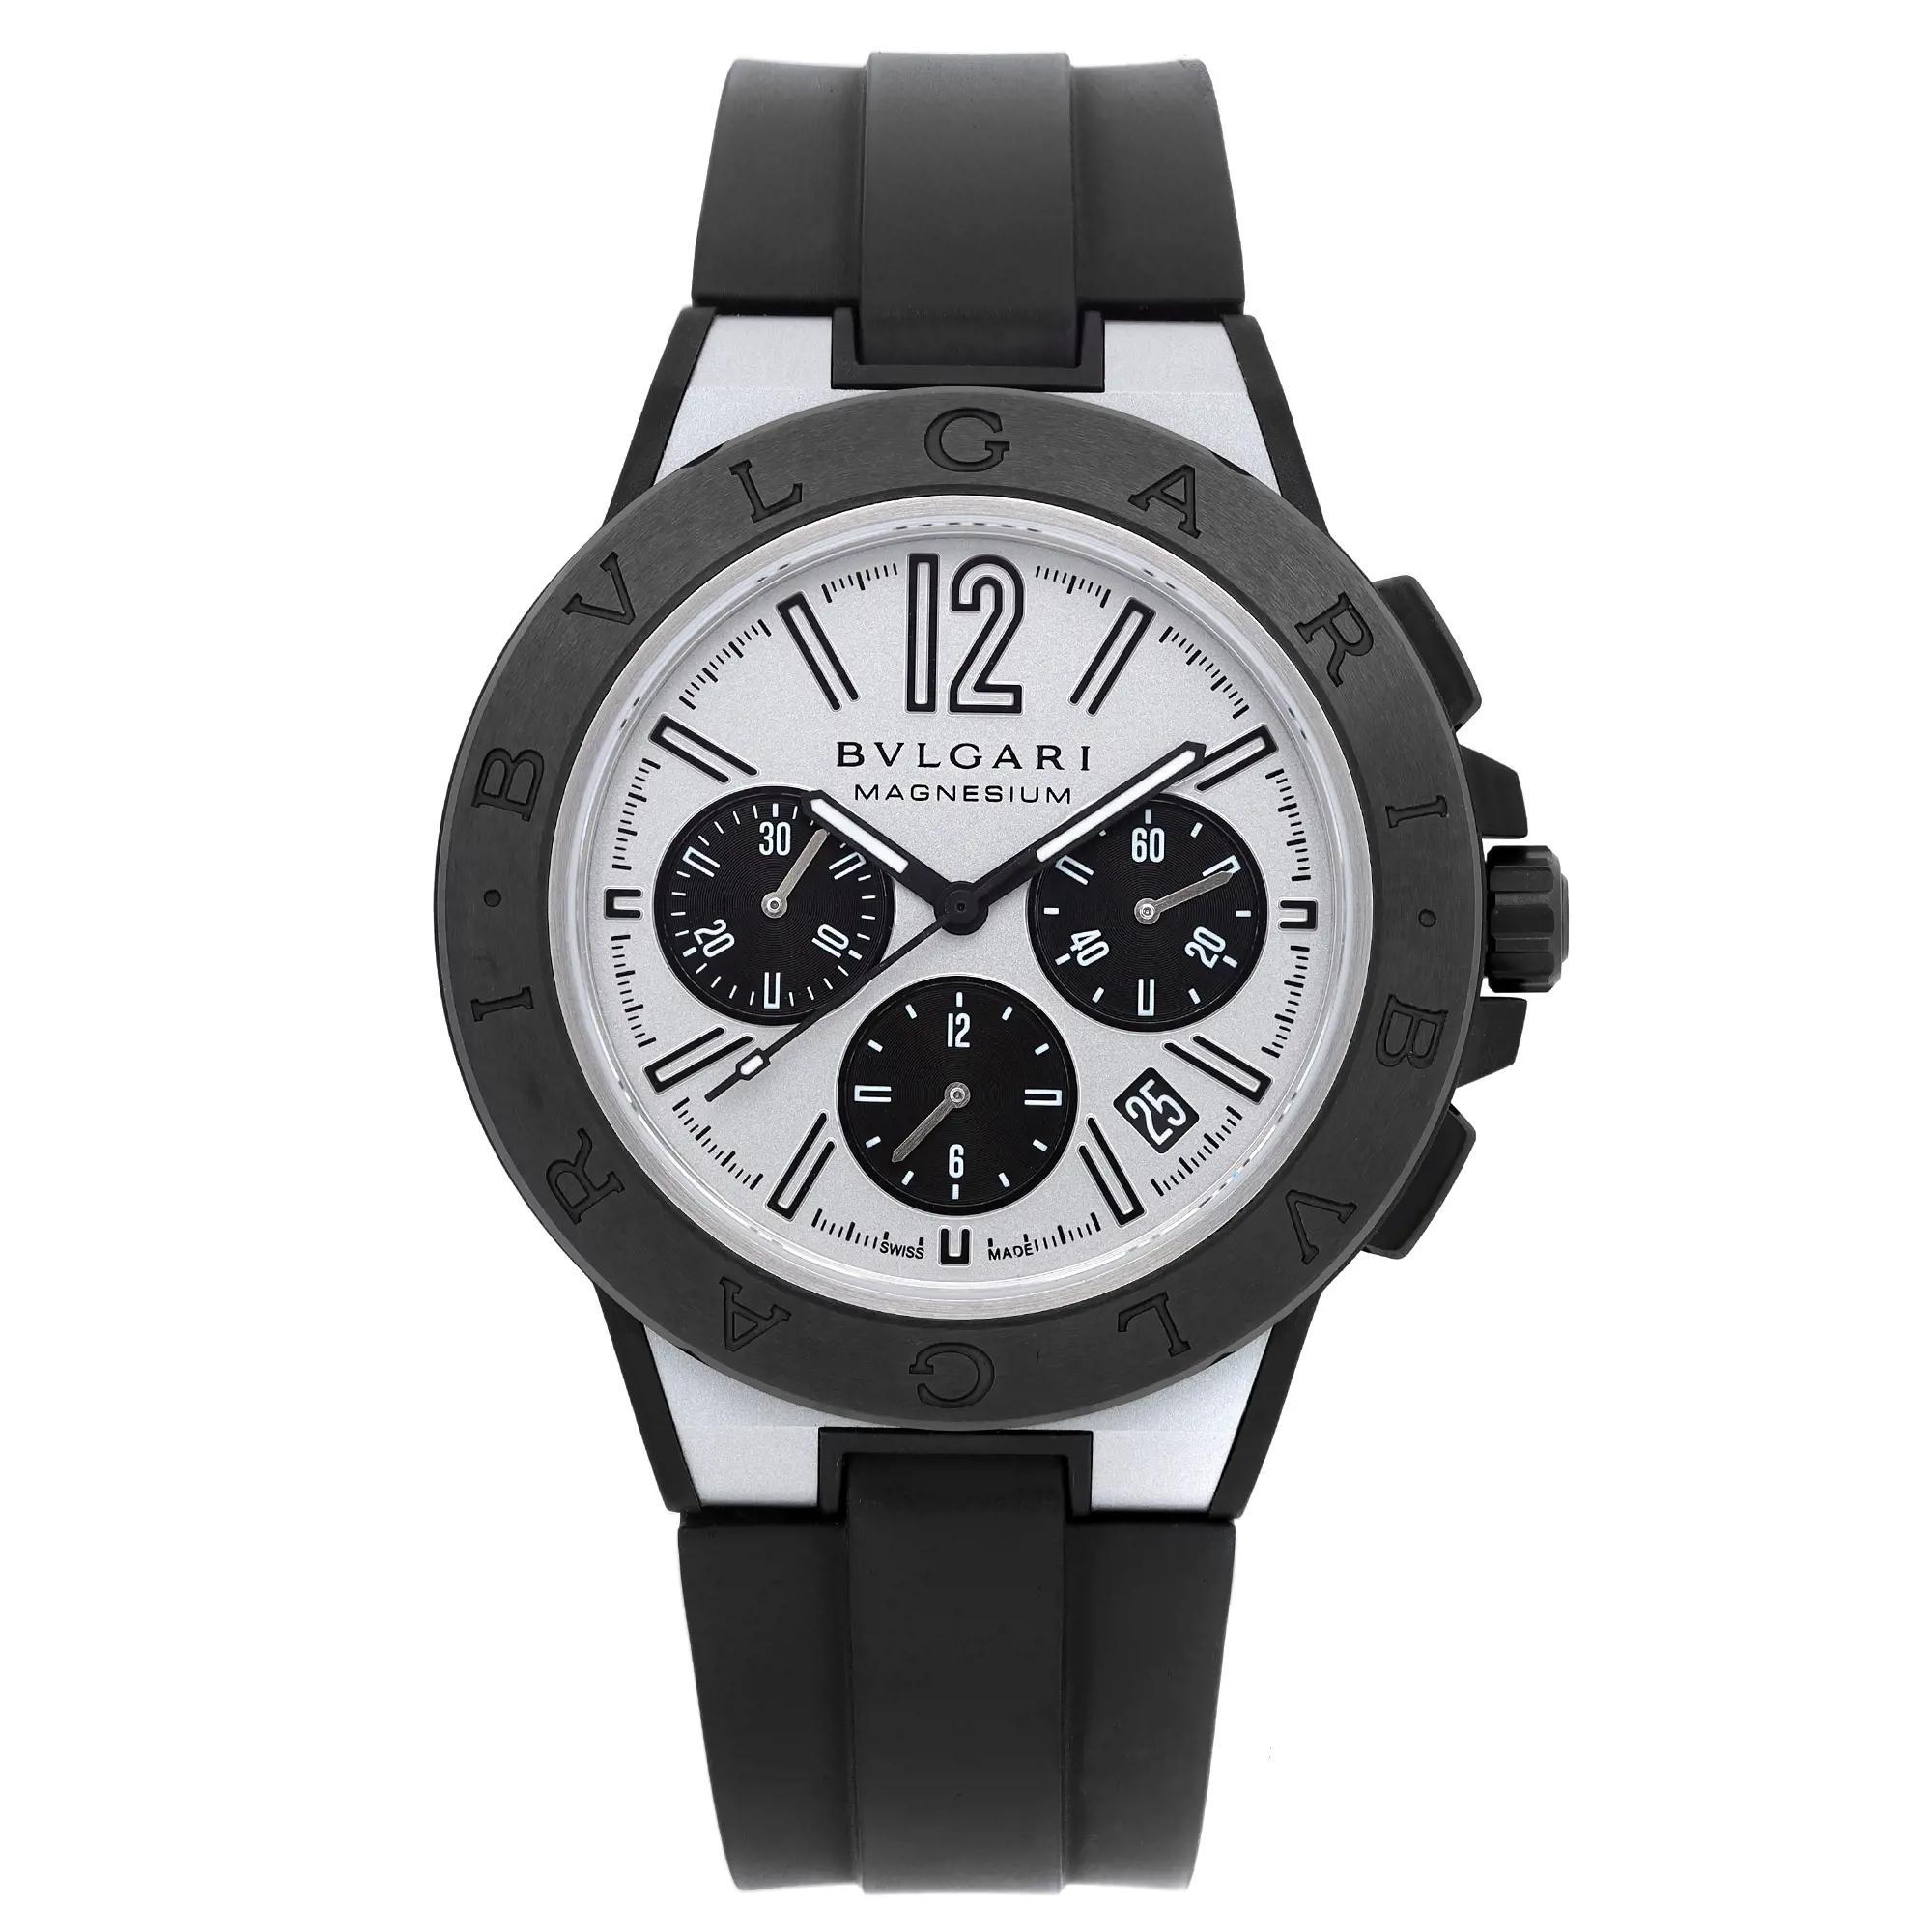 Store Display Model. The band show imperfection due to storing. Can have minor blemishes during handling and storage. 

Brand: Bvlgari  Type: Wristwatch  Department: Men  Model Number: 102305  Country/Region of Manufacture: Switzerland  Style: